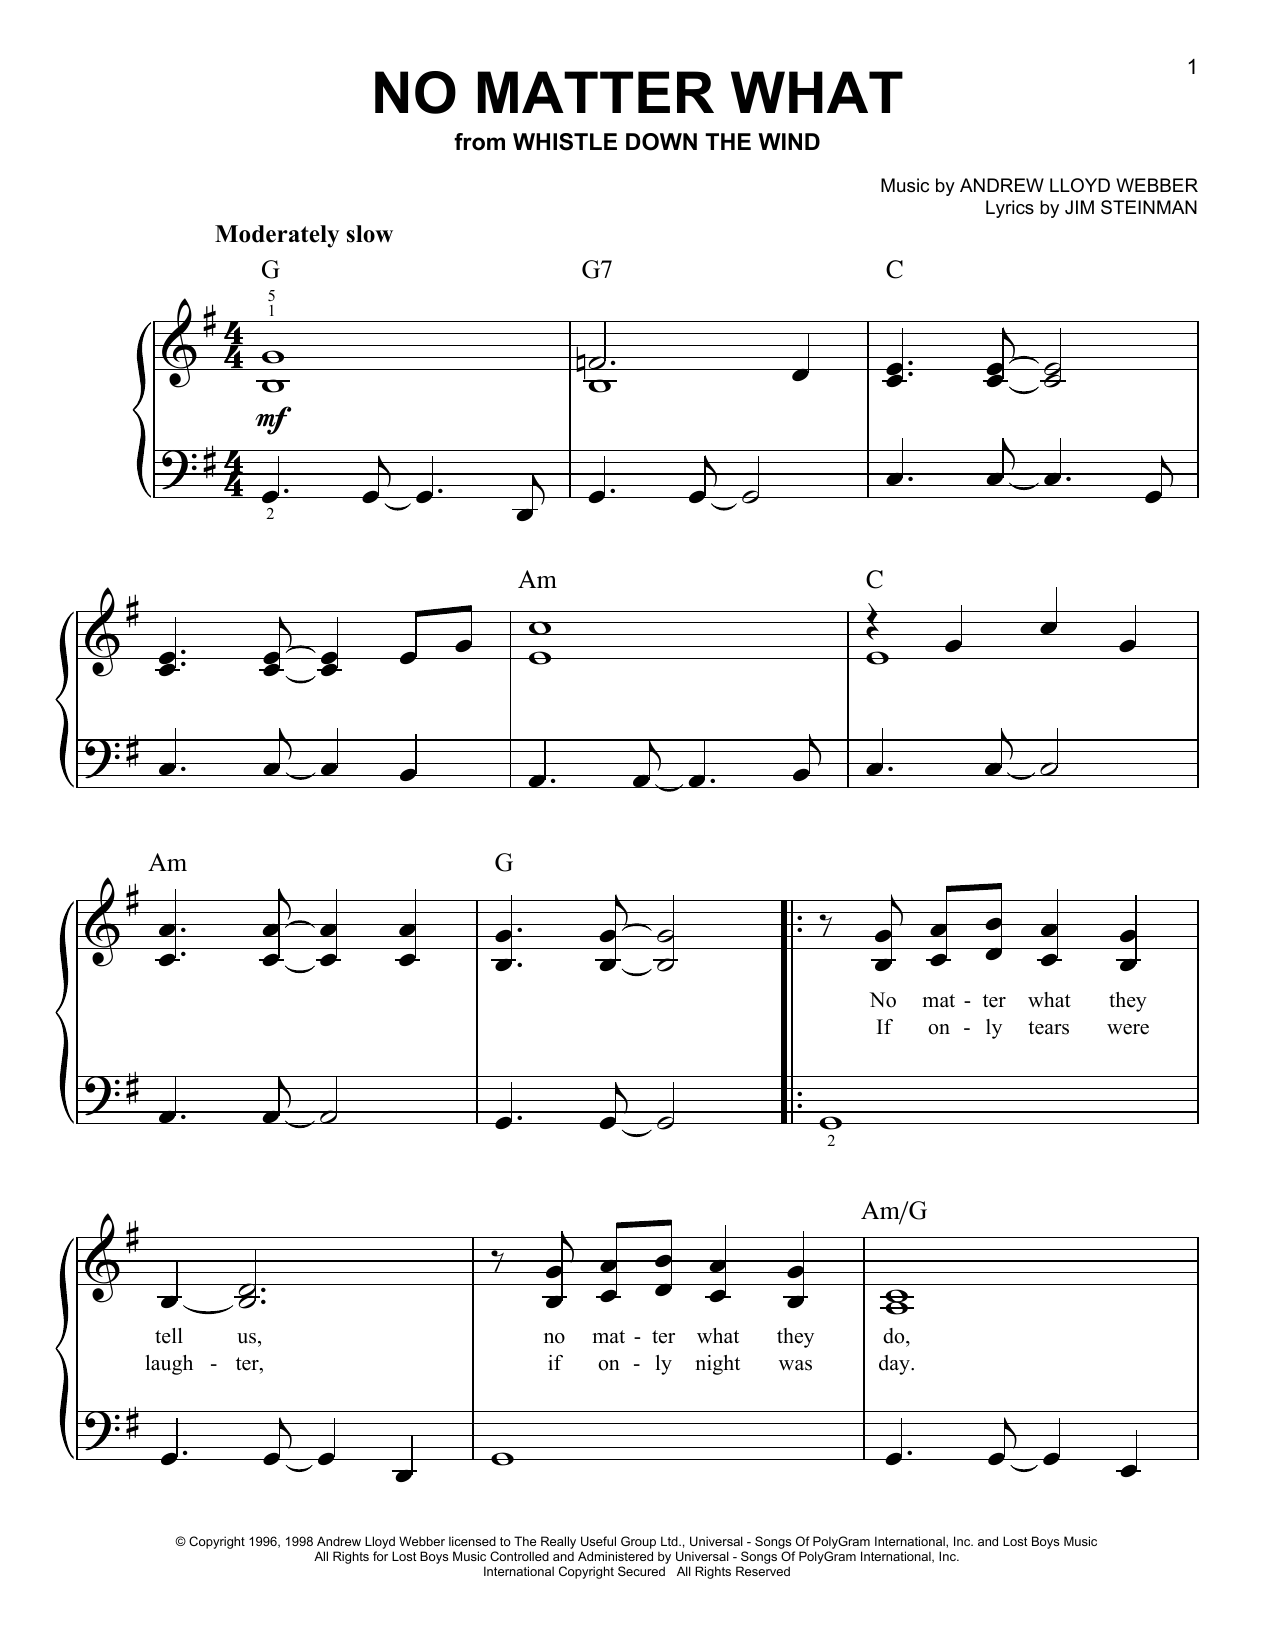 Andrew Lloyd Webber No Matter What (from Whistle Down The Wind) sheet music notes and chords. Download Printable PDF.